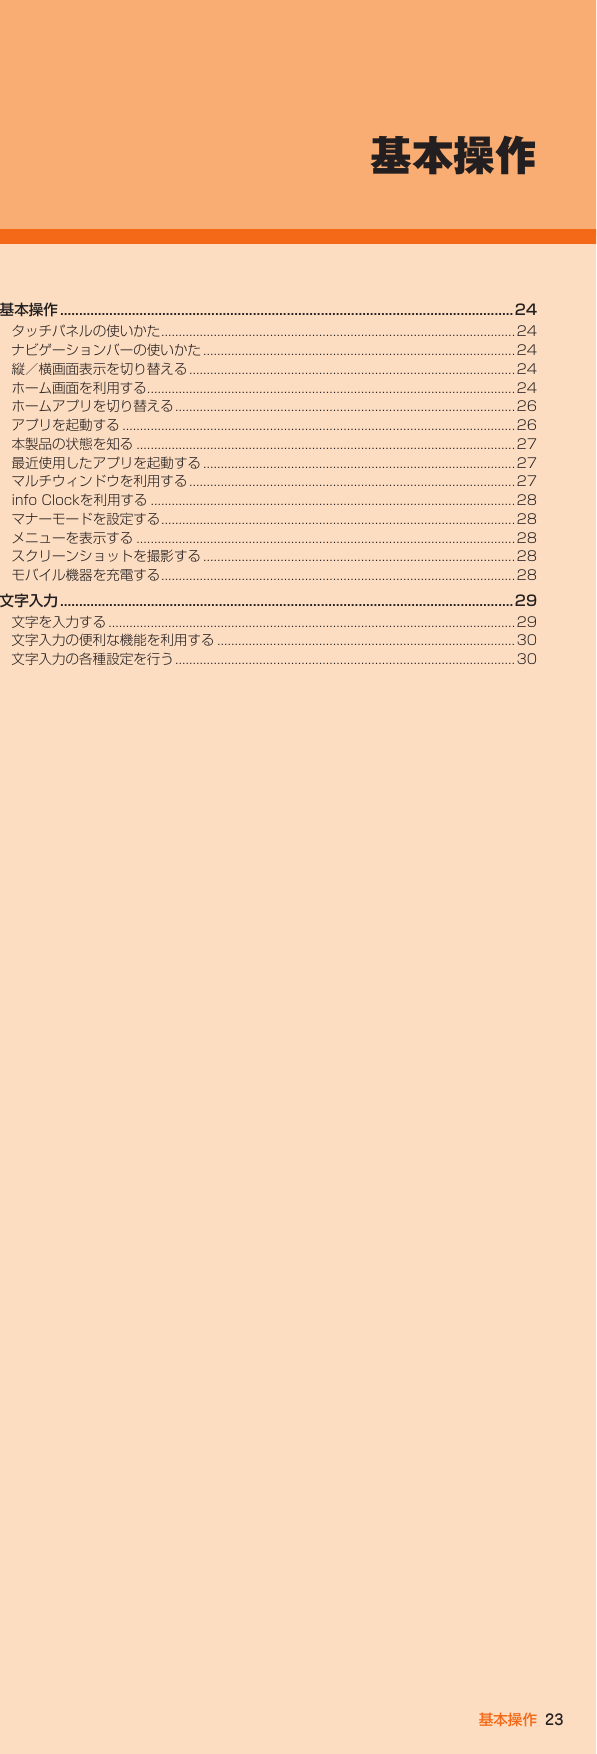 Page 24 of Kyocera FA85 Tablet User Manual 2